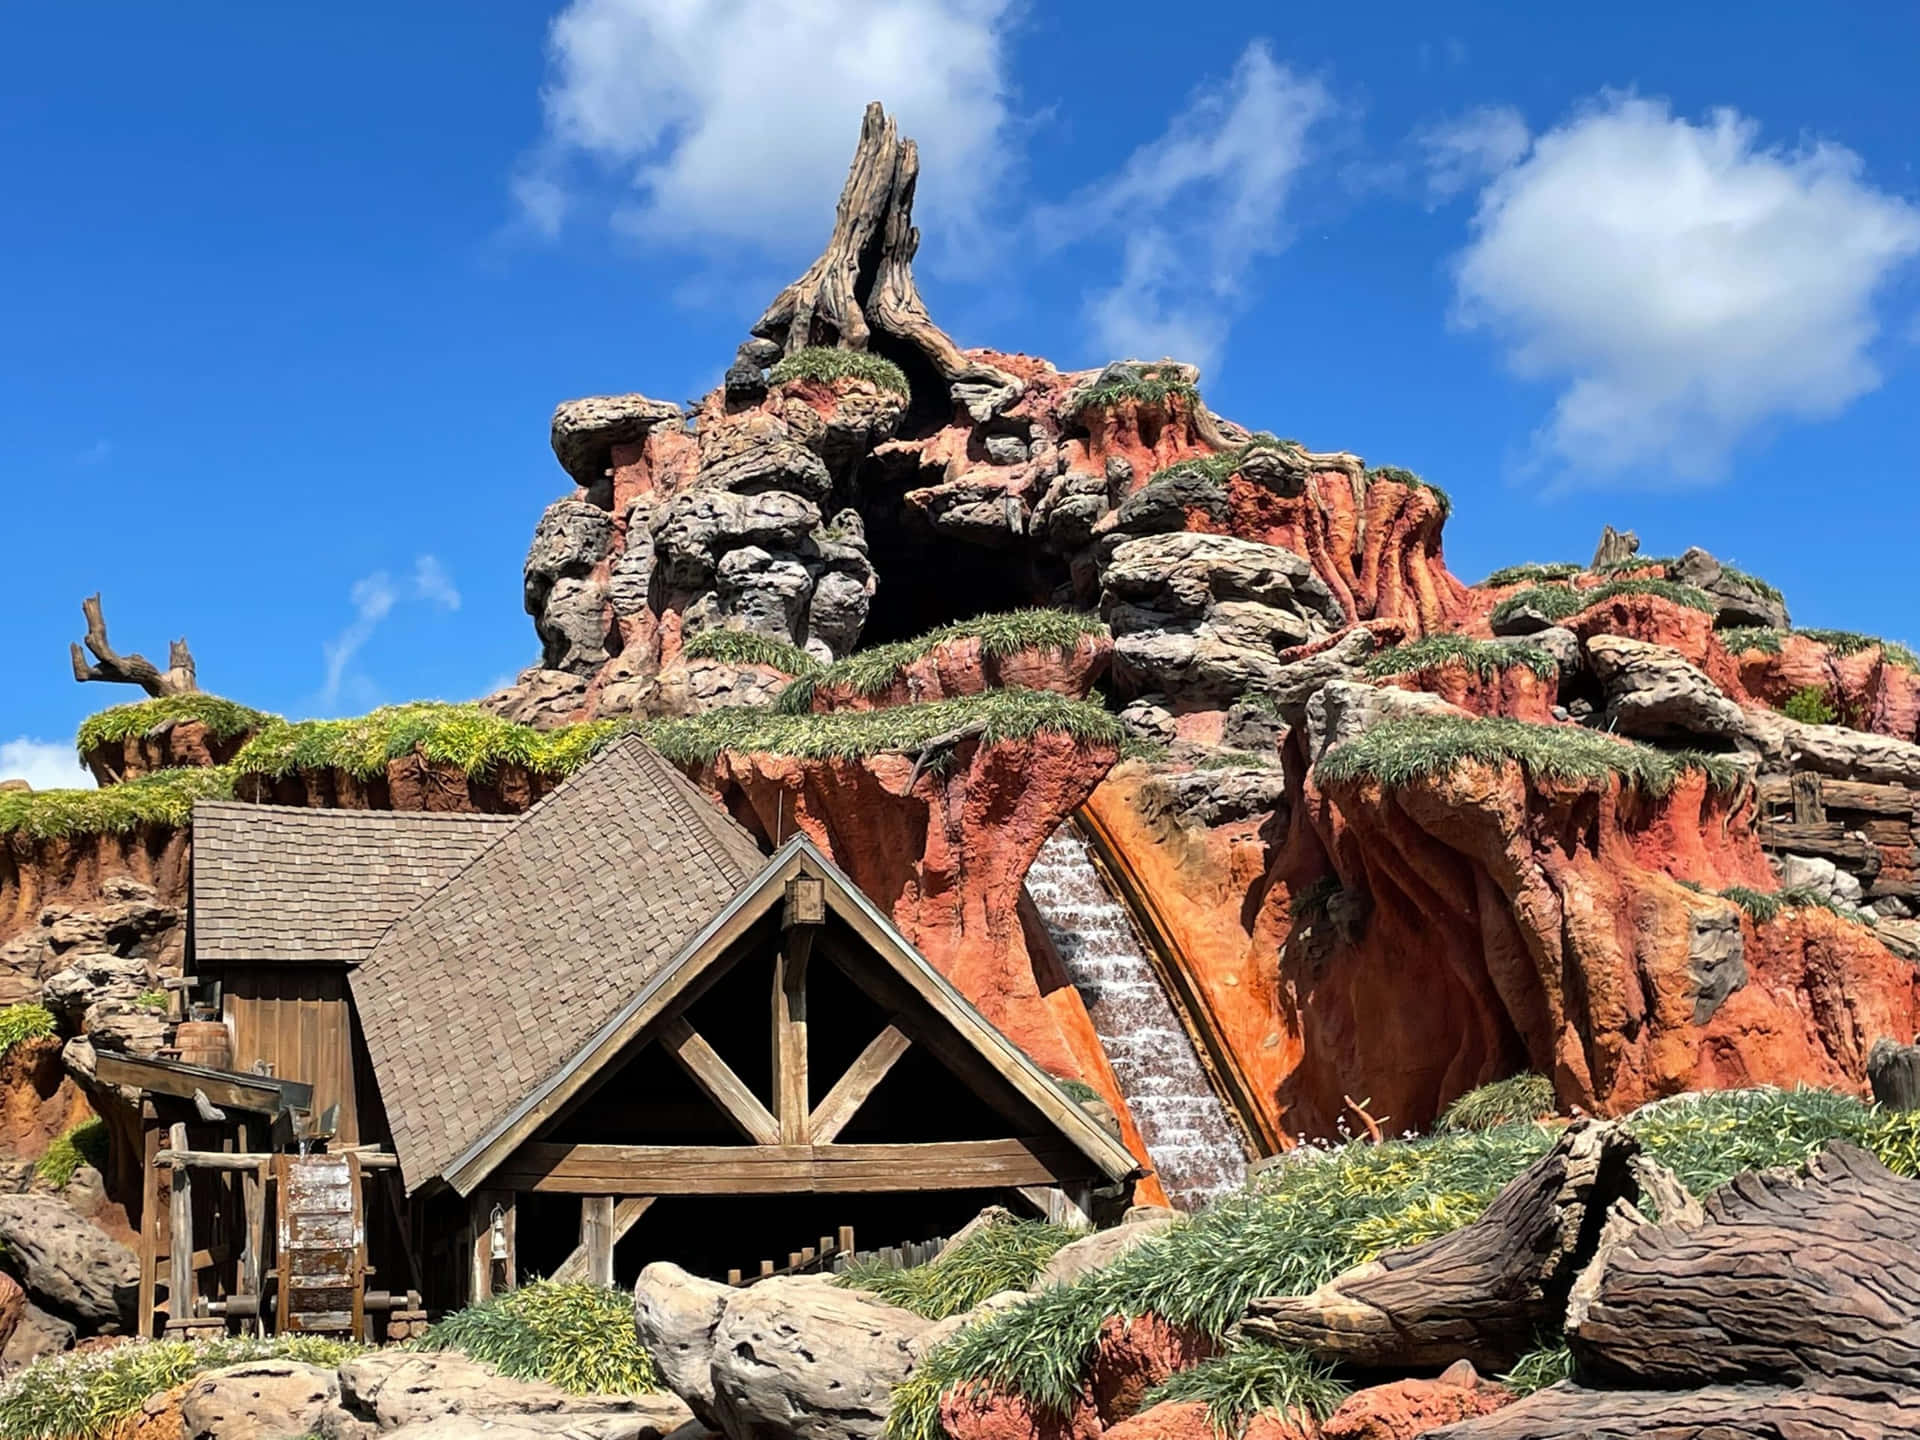 "Climb Aboard for a Thrilling Adventure Down Splash Mountain!"